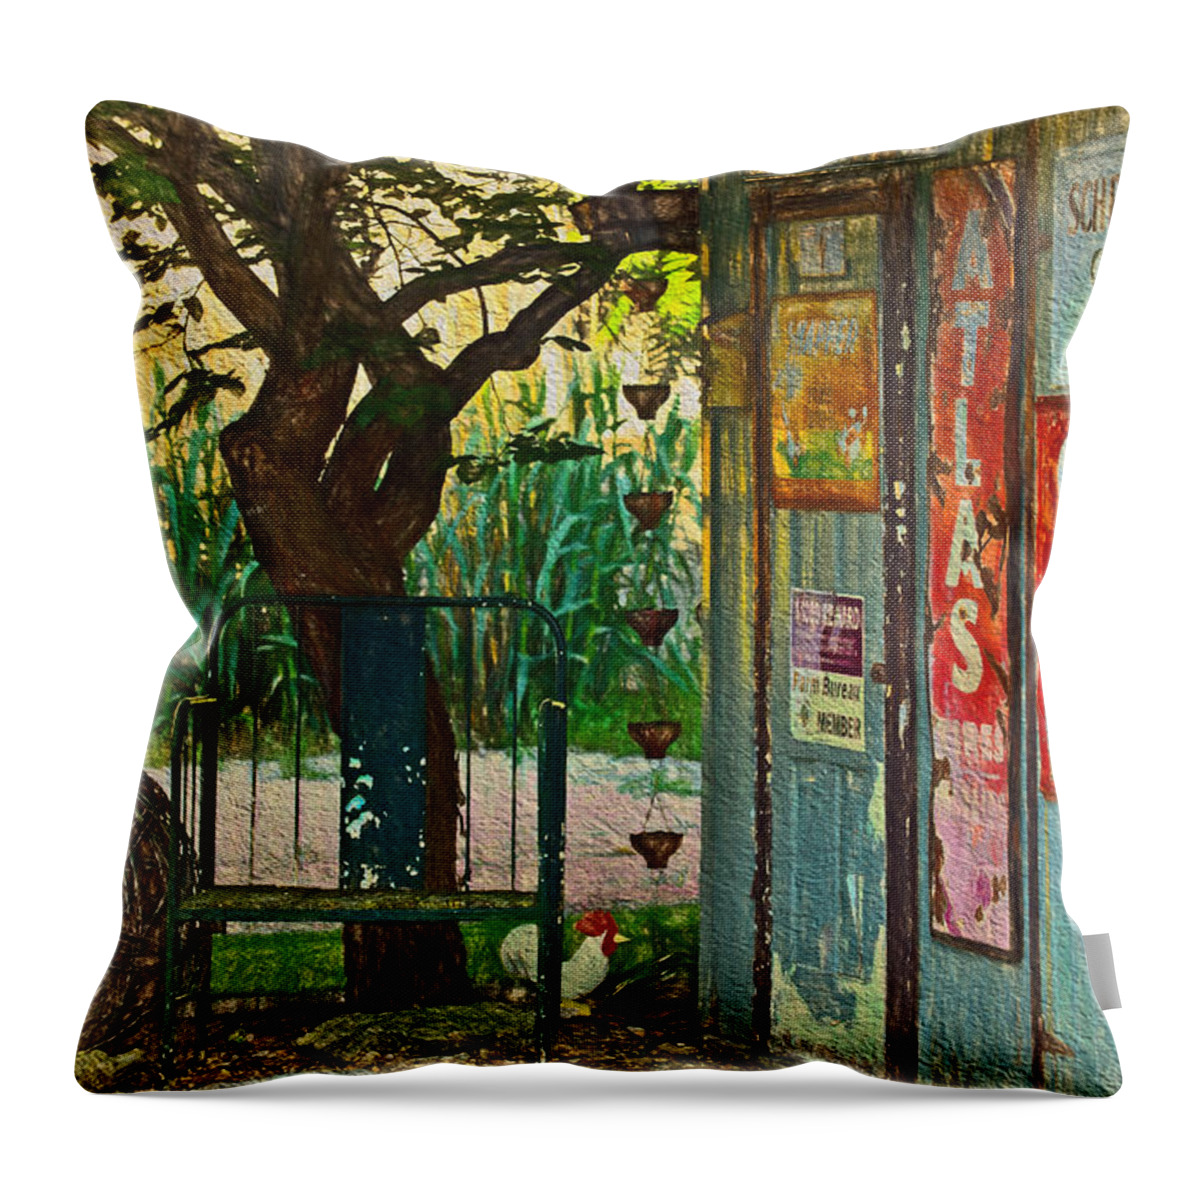 Yard Art Throw Pillow featuring the photograph Old and Used Yard Decor by Anna Louise